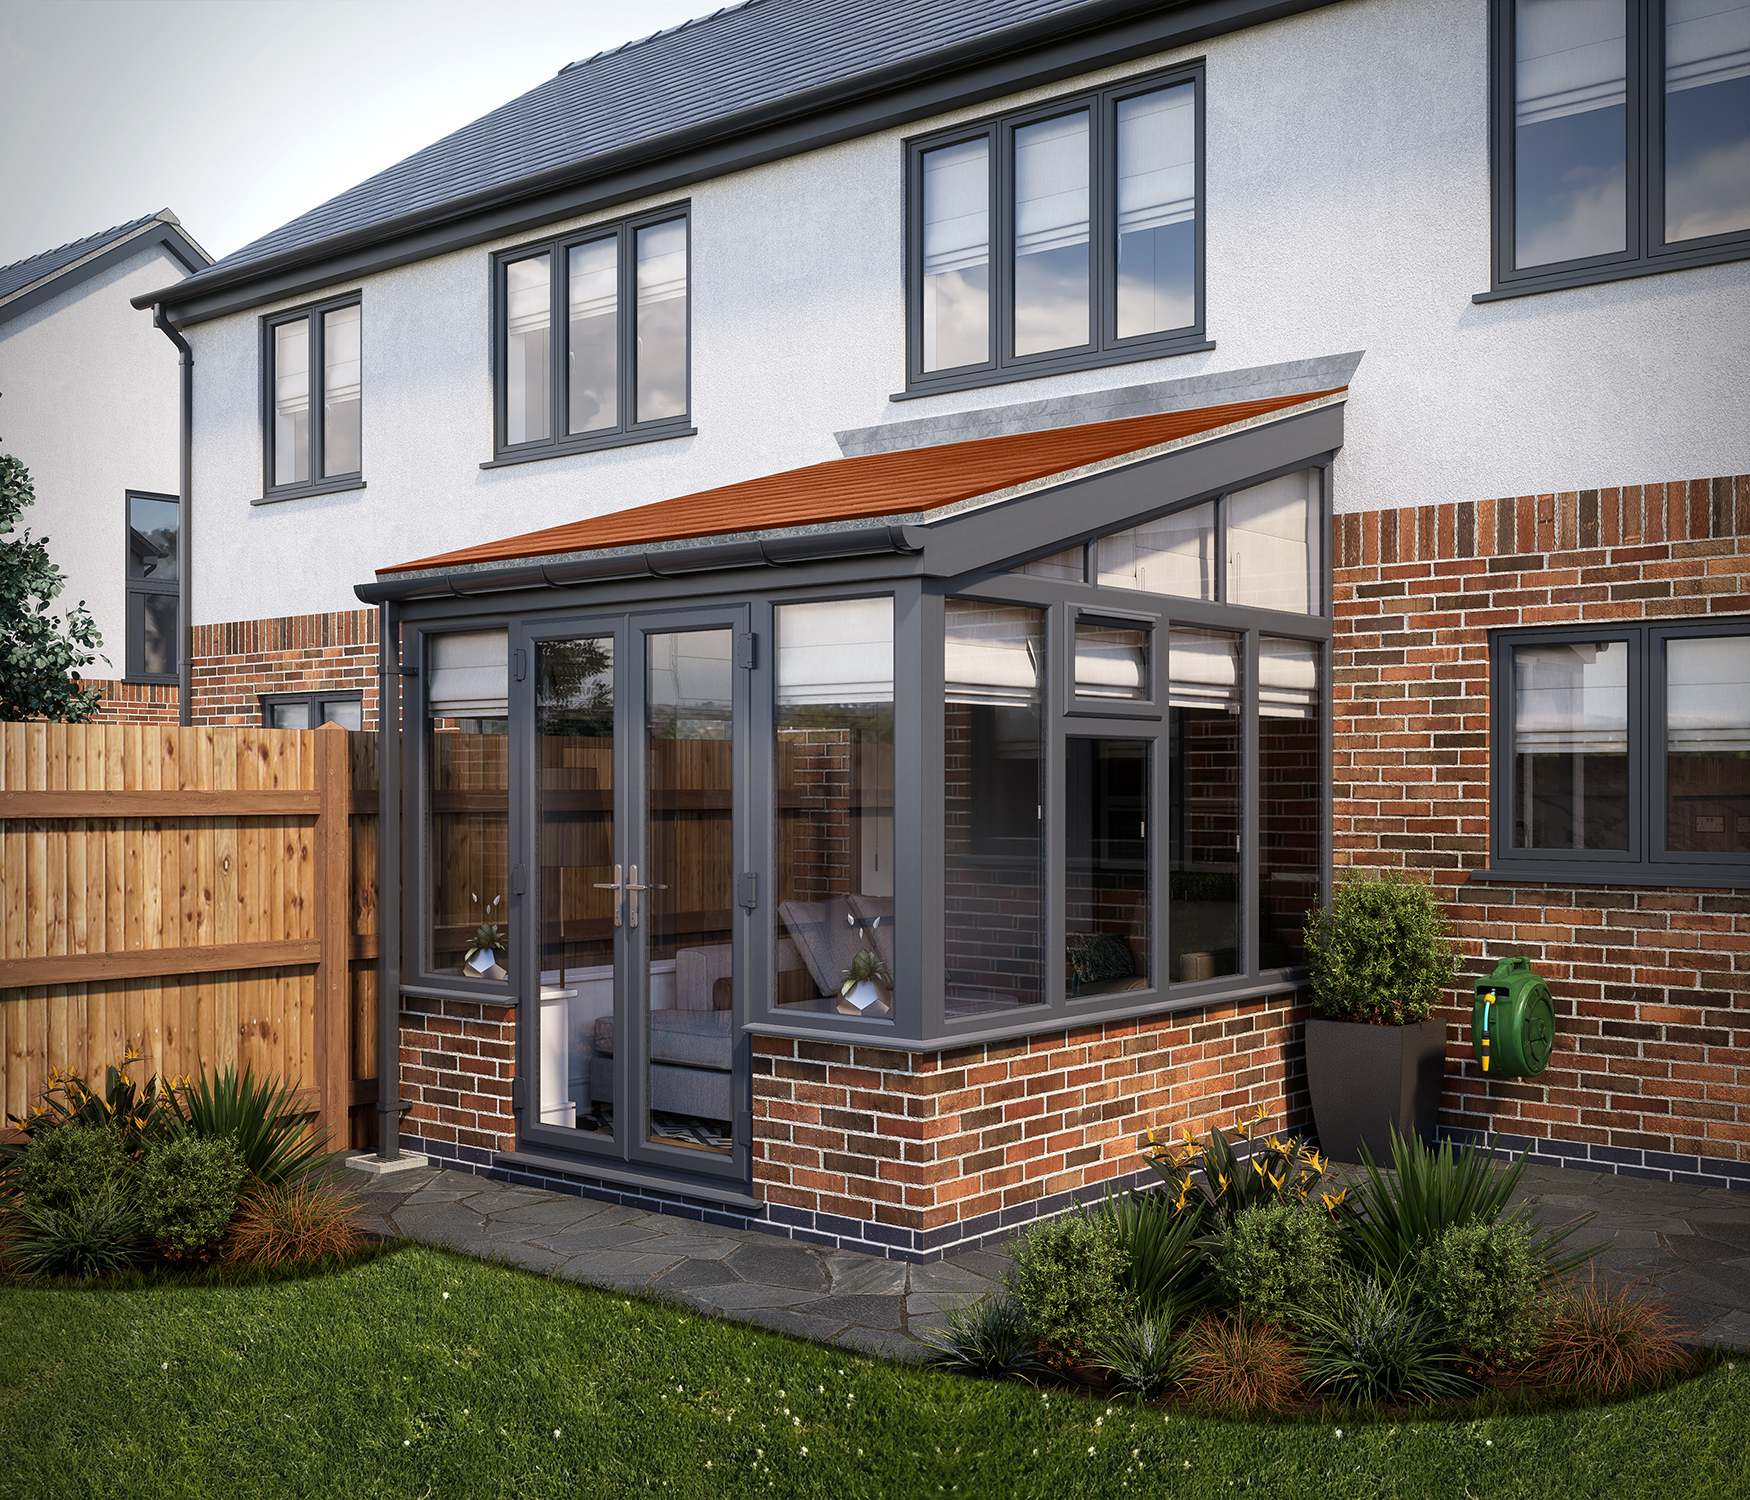 SOLid roof Lean to Conservatory Grey Frames Dwarf Wall with Rustic Terracotta Tiles